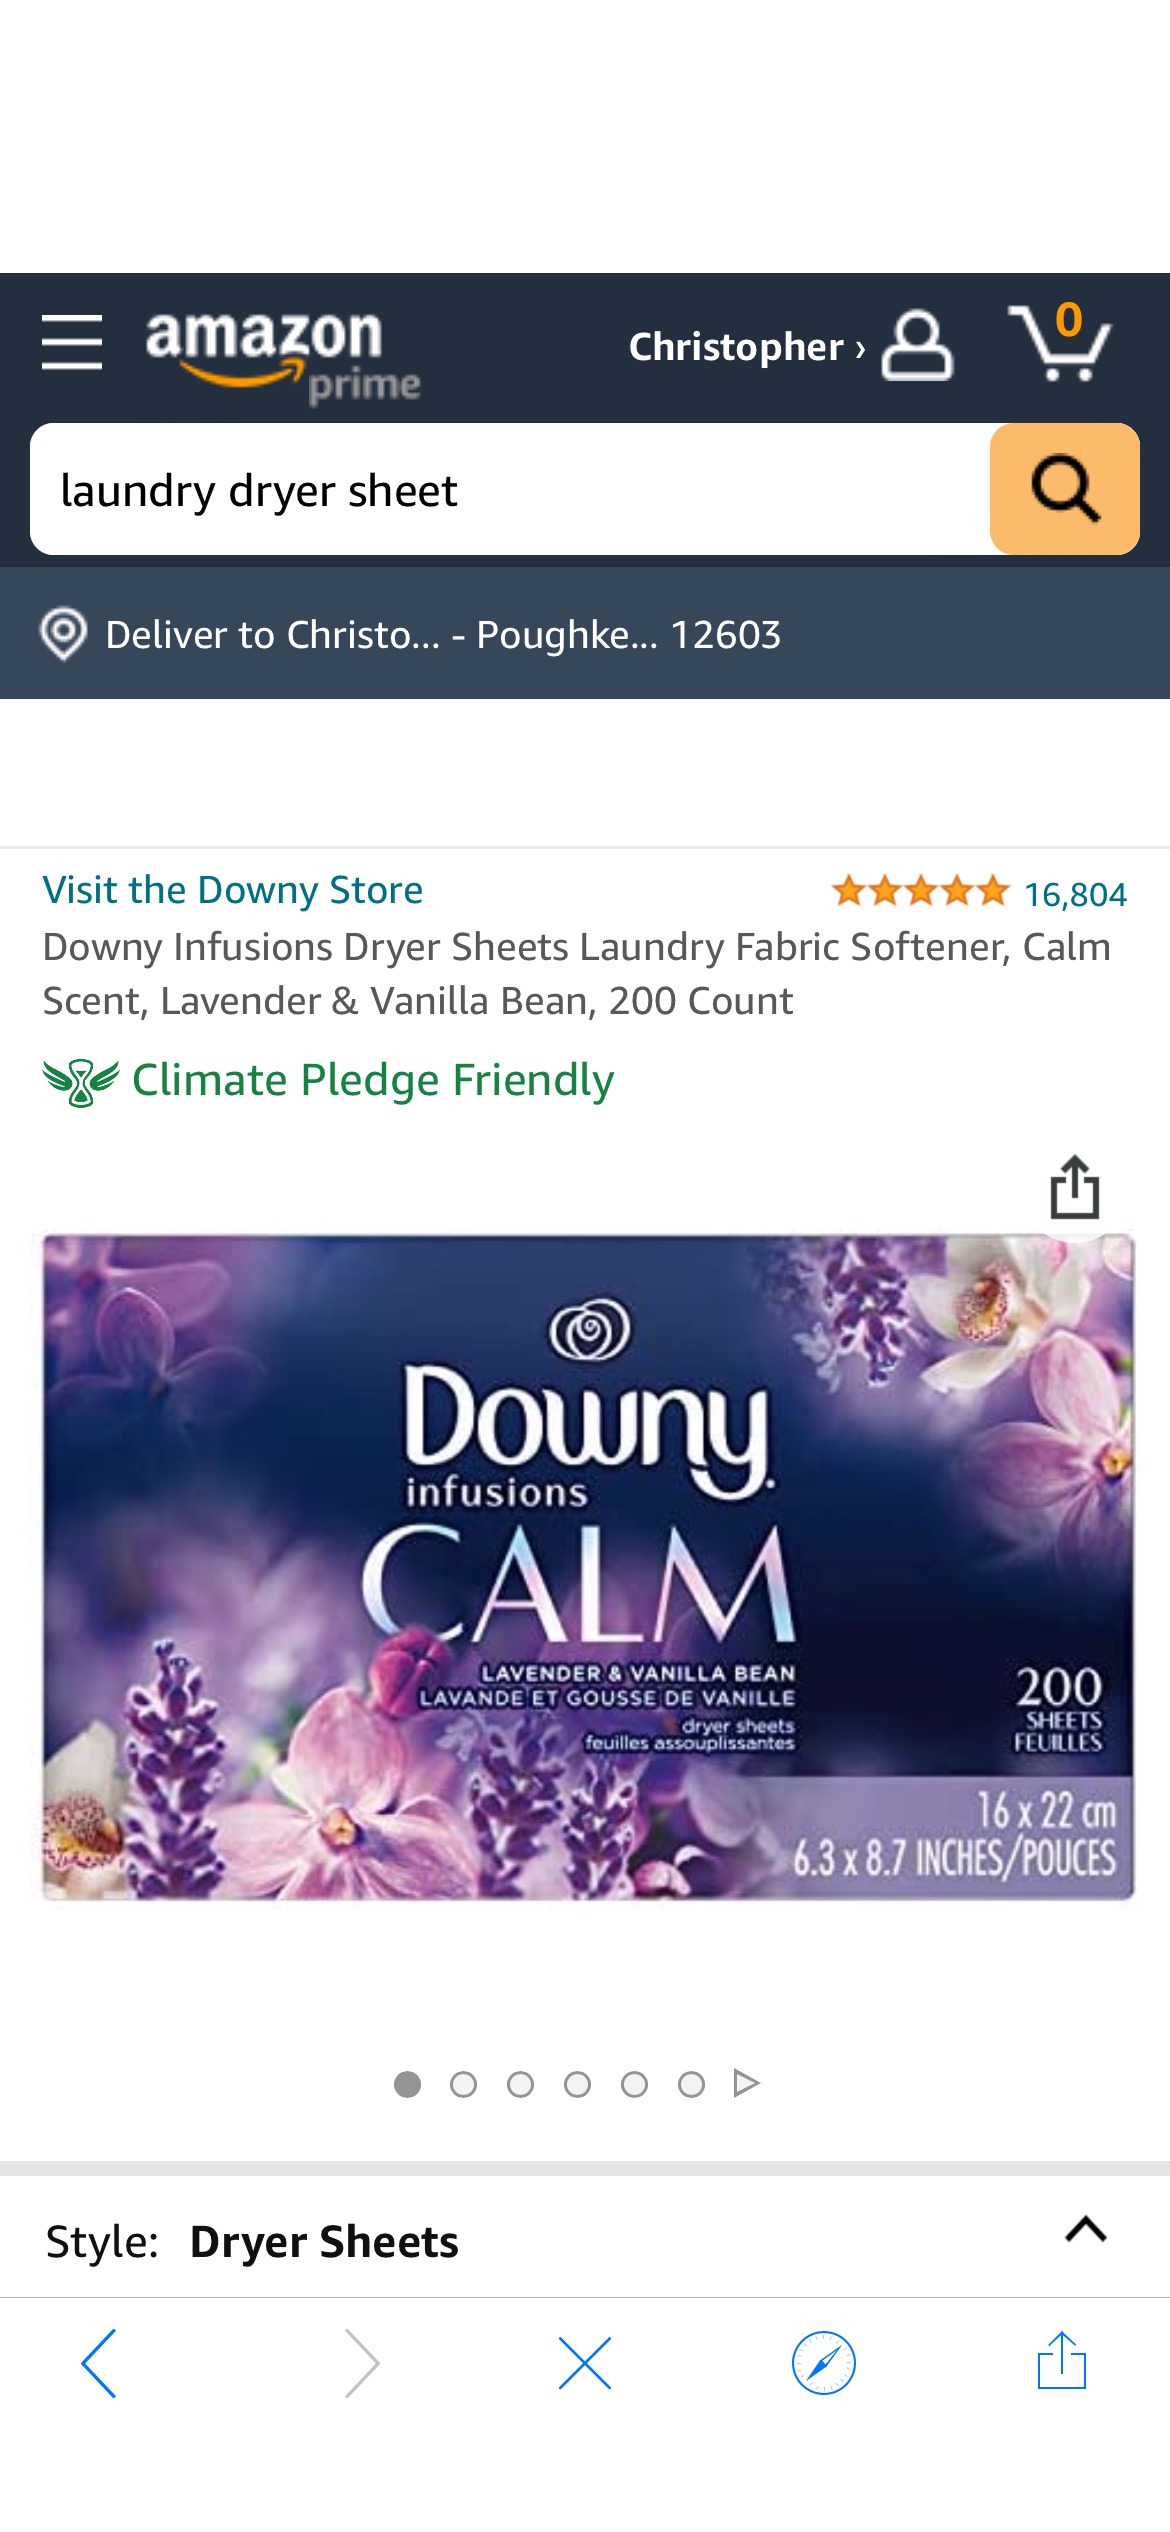 Amazon.com: Downy Infusions Dryer Sheets Laundry Fabric Softener, Calm Scent, Lavender & Vanilla Bean, 200 Count : Beauty & Personal Care烘干纸